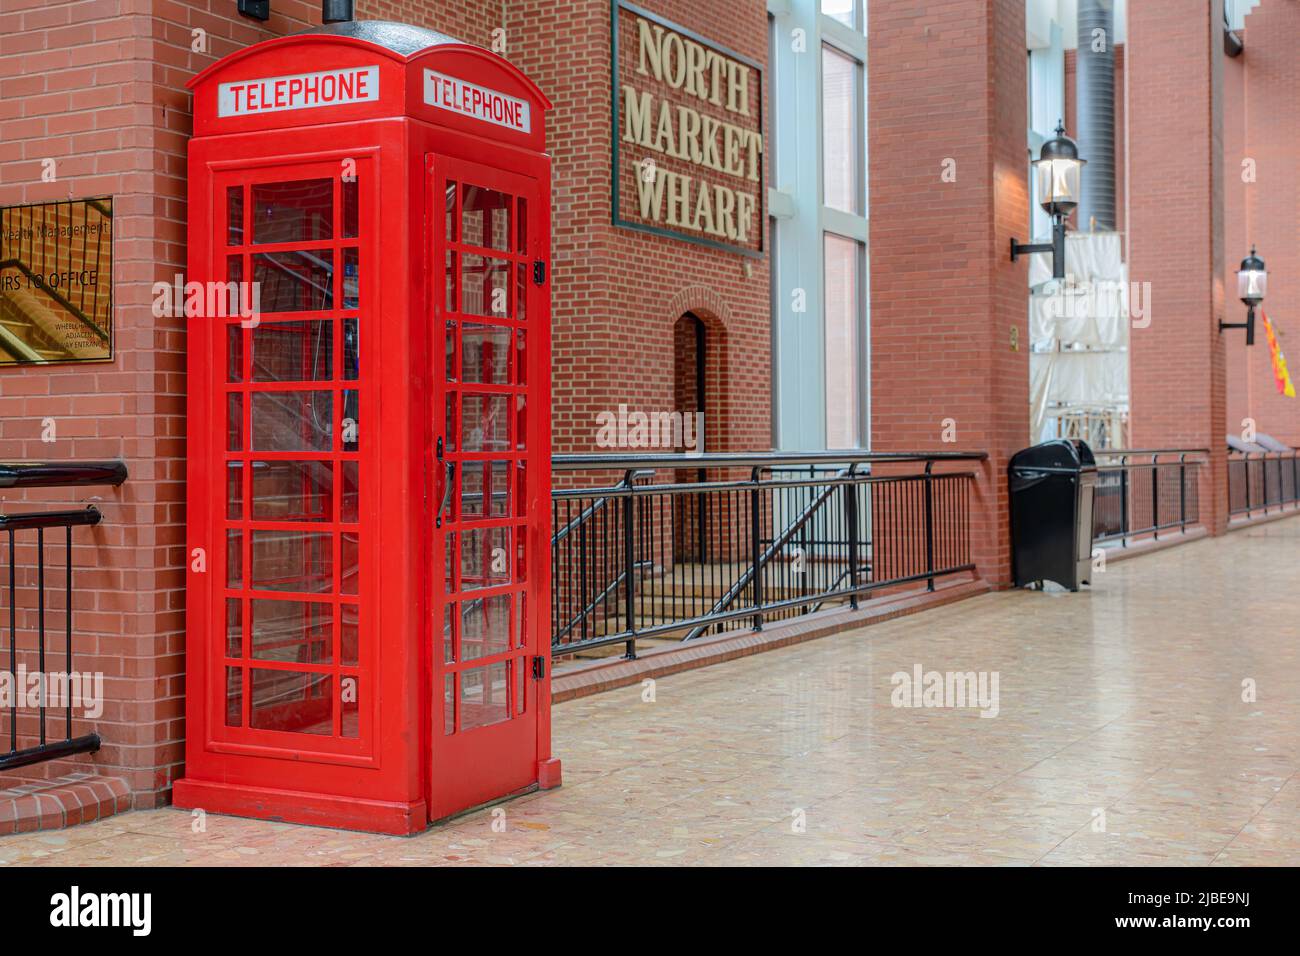 Saint John, NB, Canada - June 5, 2022: A red phone booth. The booth is the famous British K6 design, but without the crown at the top. Stock Photo